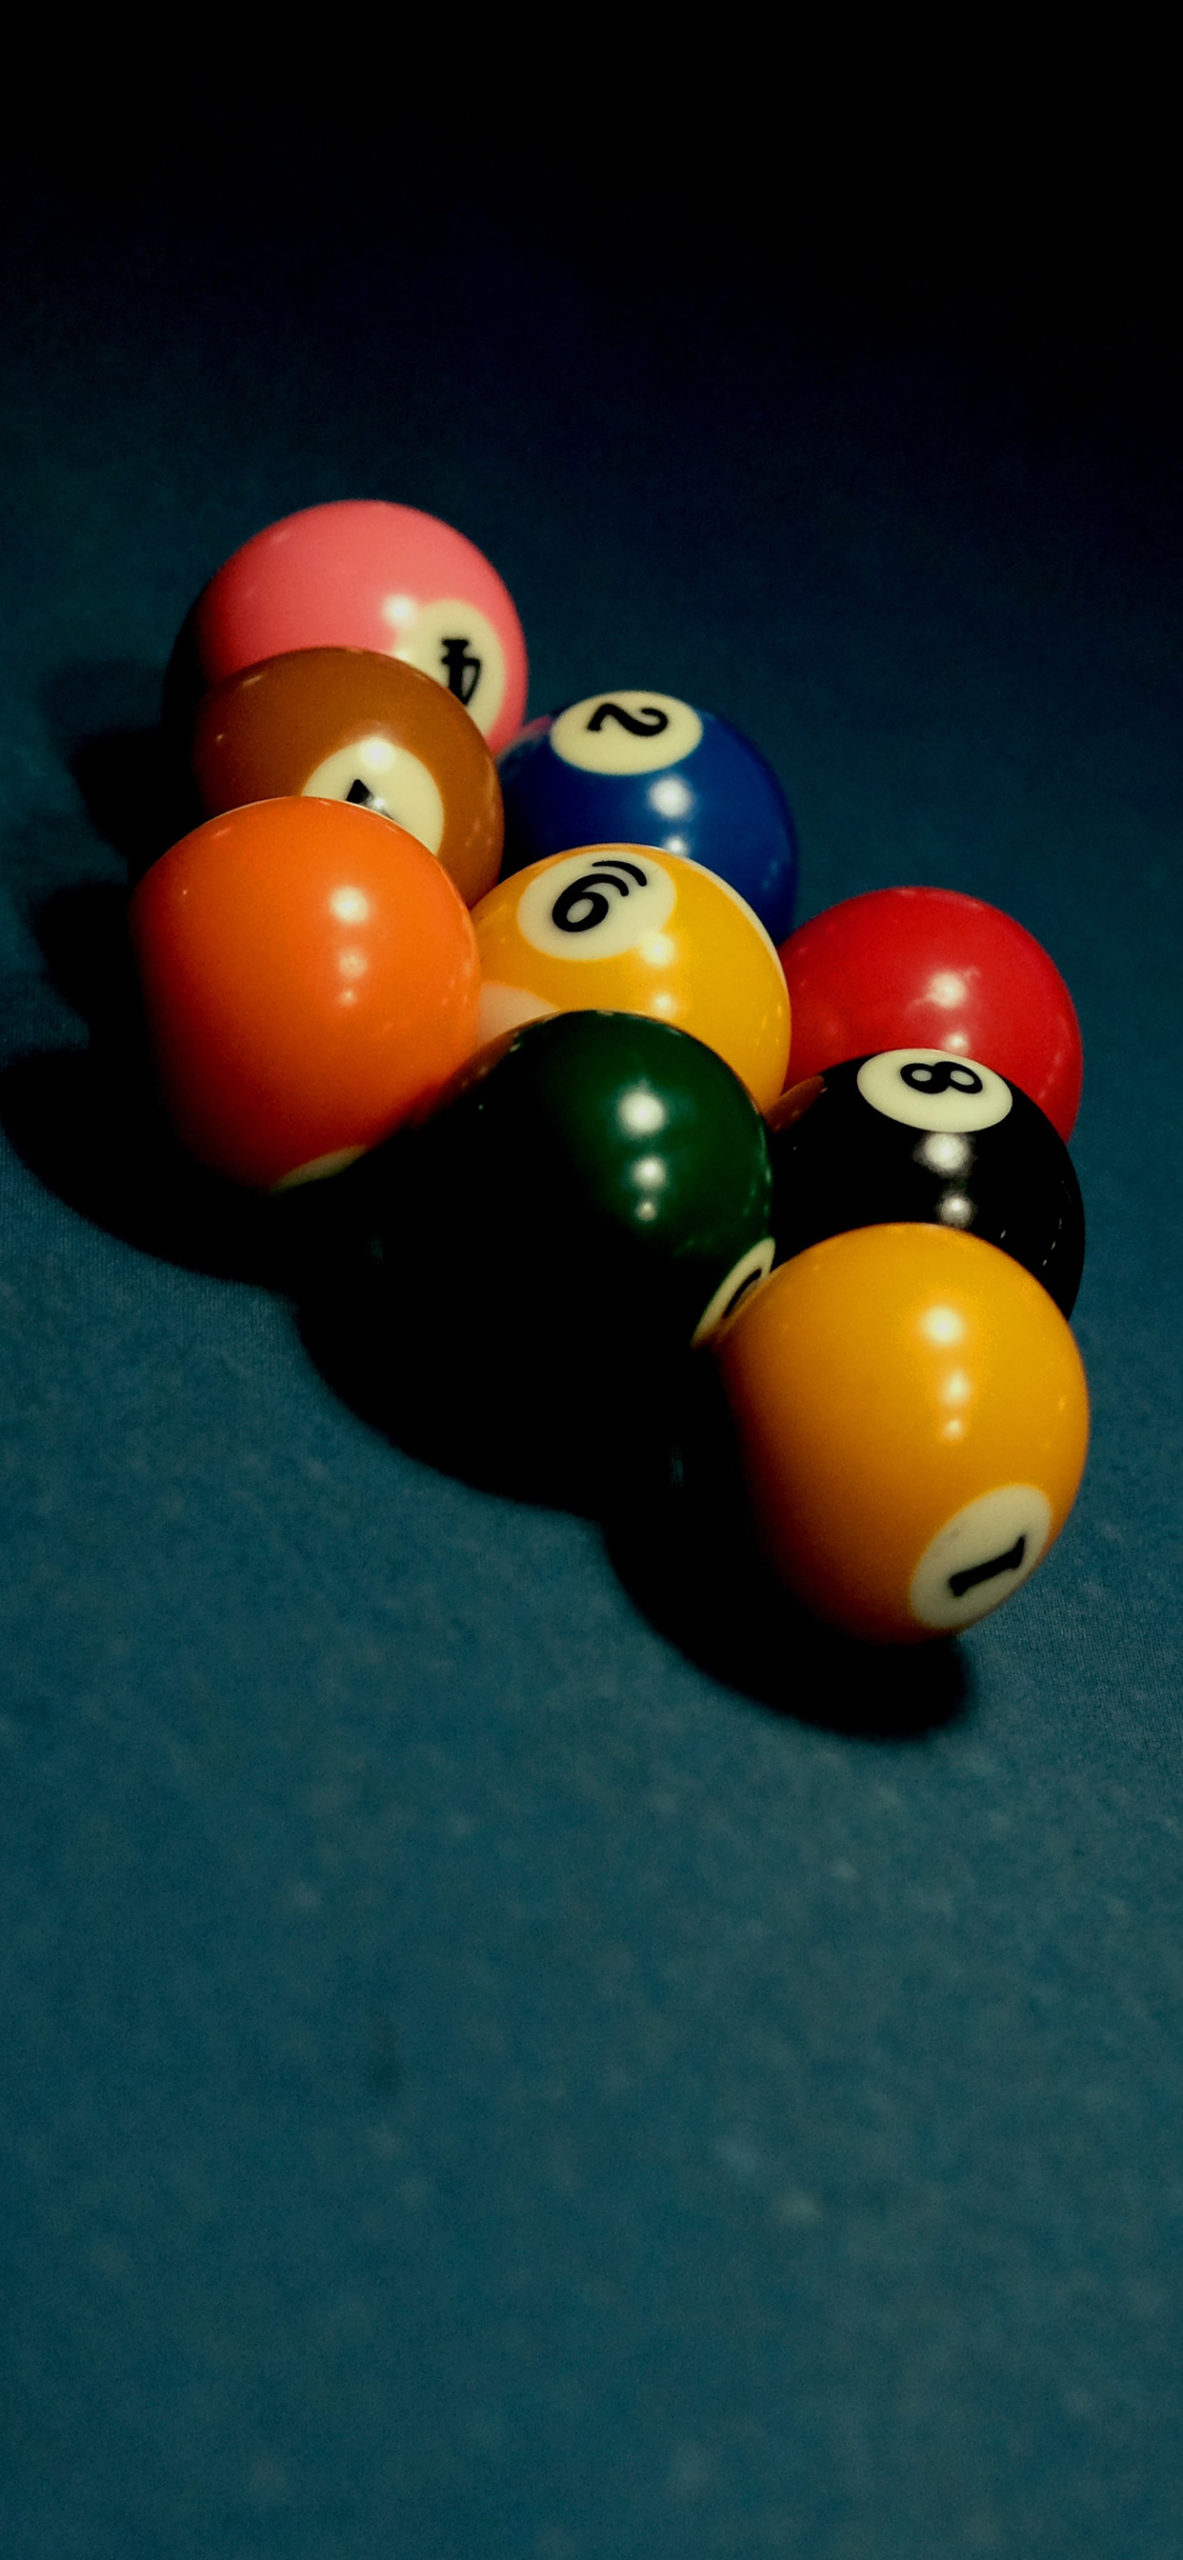 Pool game Wallpaper for iPhone Pro Max, X, 6